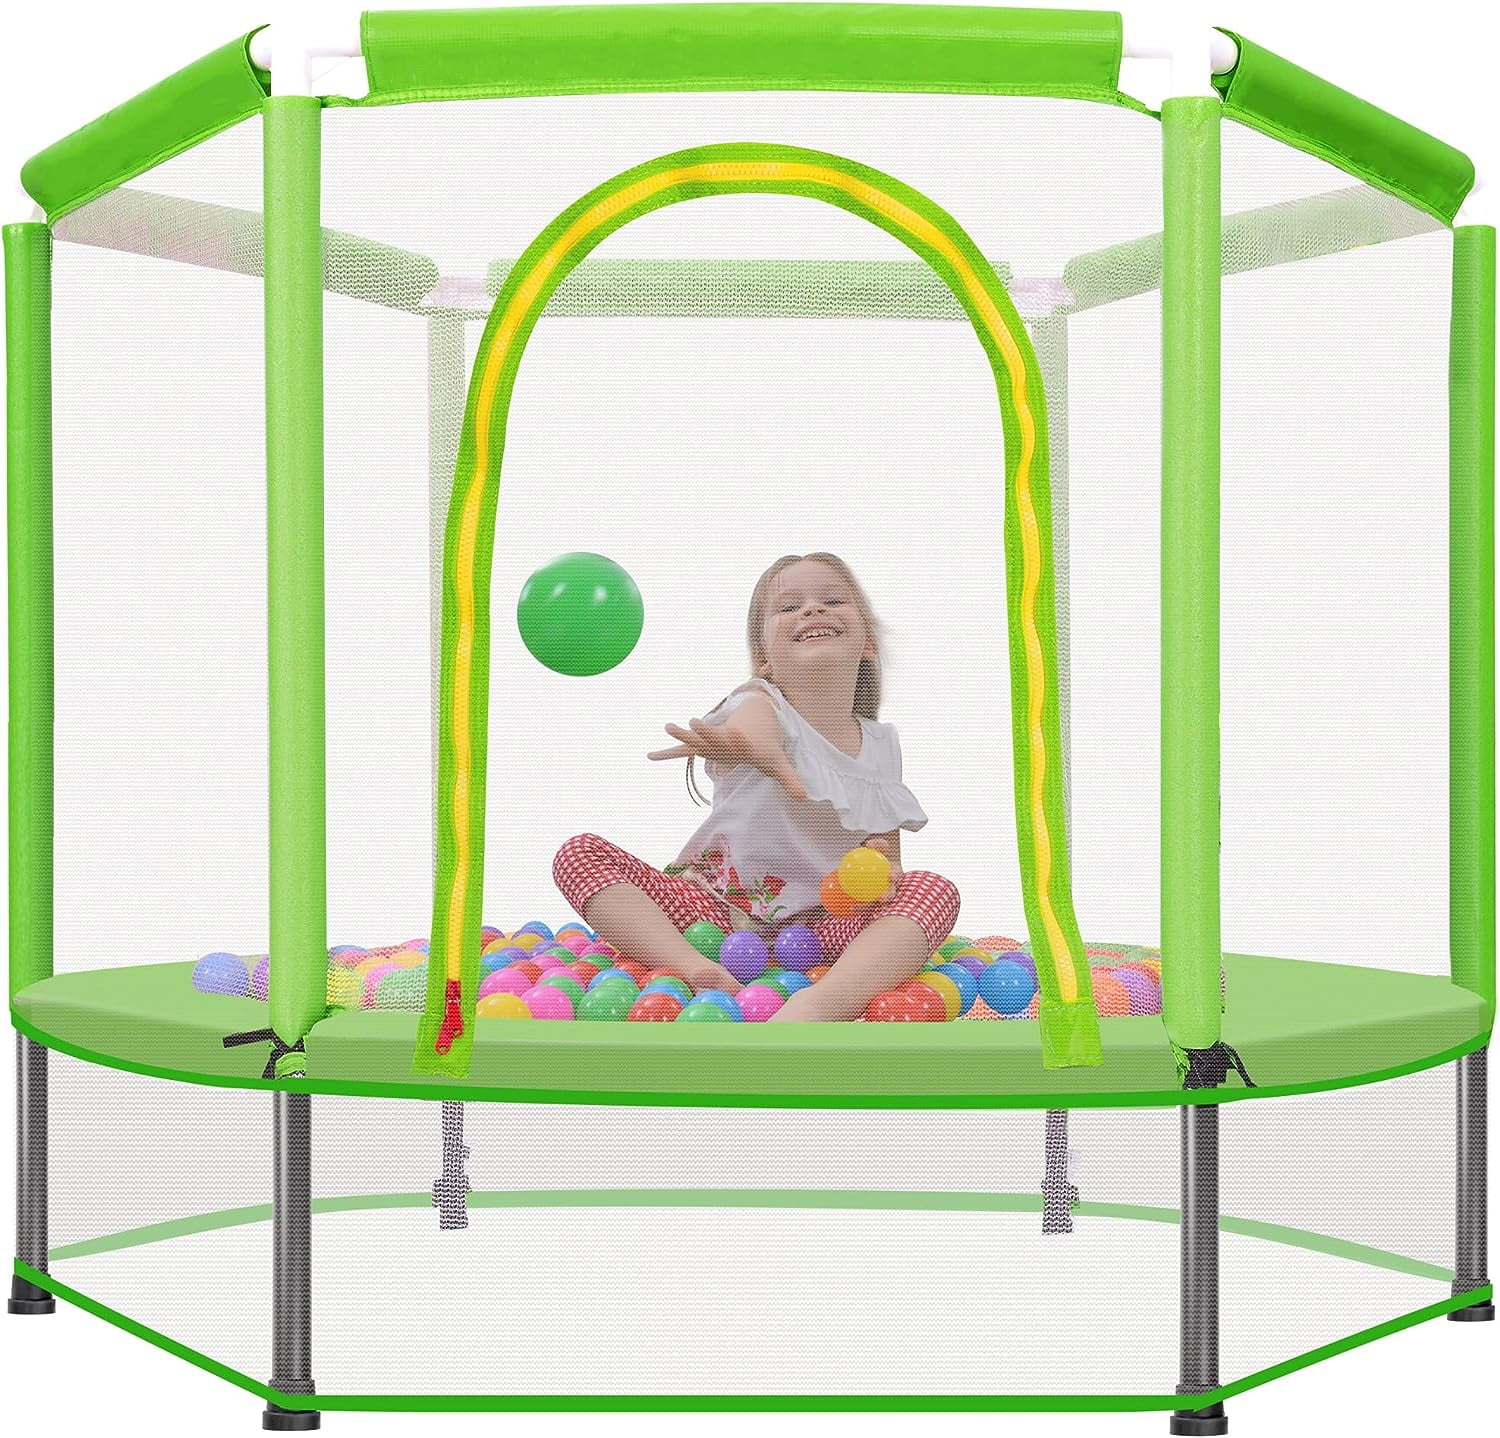 en sælger Angreb kranium KOFUN 55" Mini Trampoline for Kids, 4.5FT Indoor Outdoor Toddler Trampoline  with Safety Enclosure Net and Pit Balls, Baby Small Trampoline Birthday  Gifts for Boy and Girls Age 3 Months and up,